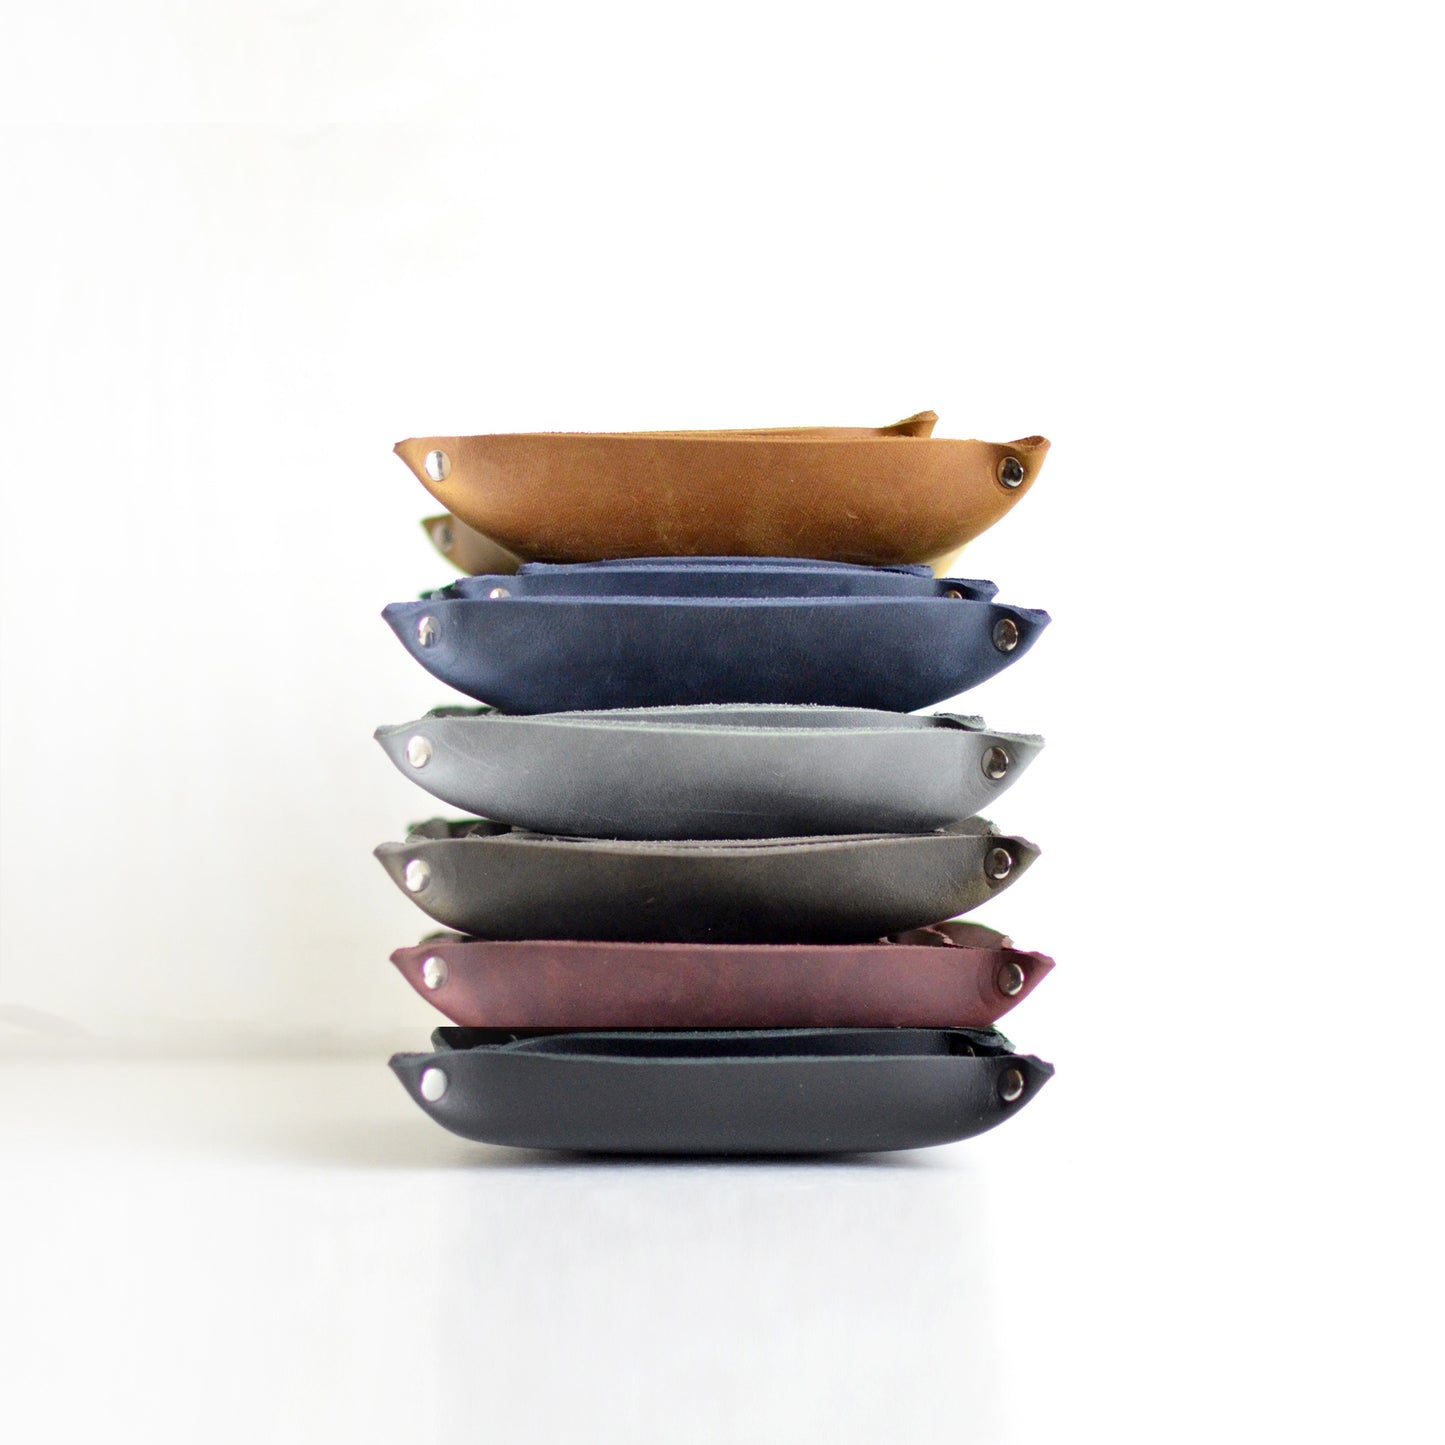 3 Stacking Trays - Honey Brown Leather